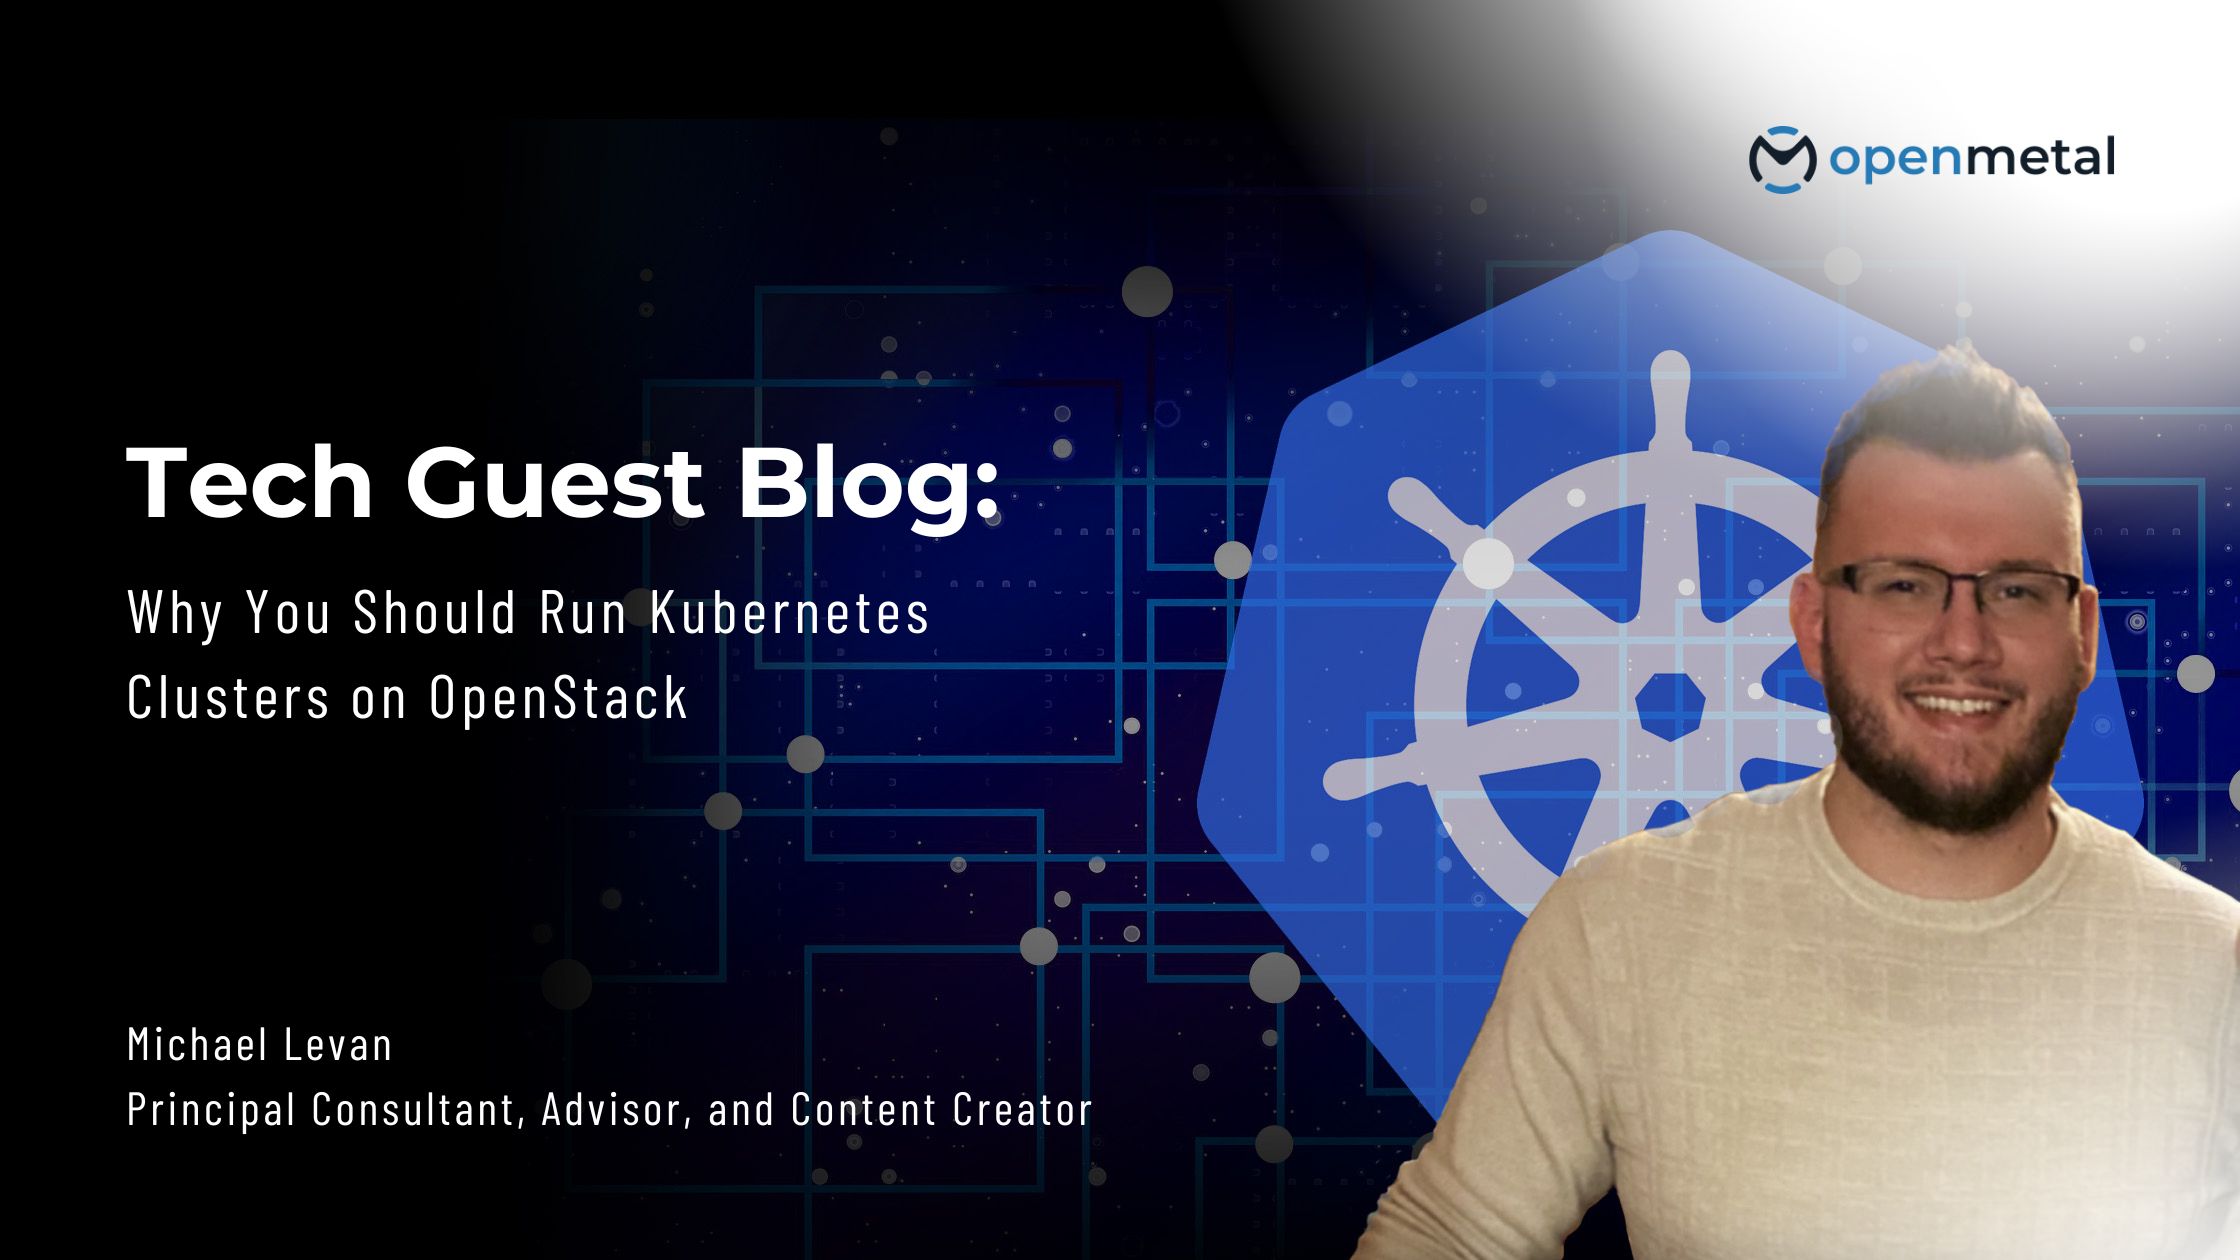 Why You Should Run Kubernetes Clusters on OpenStack